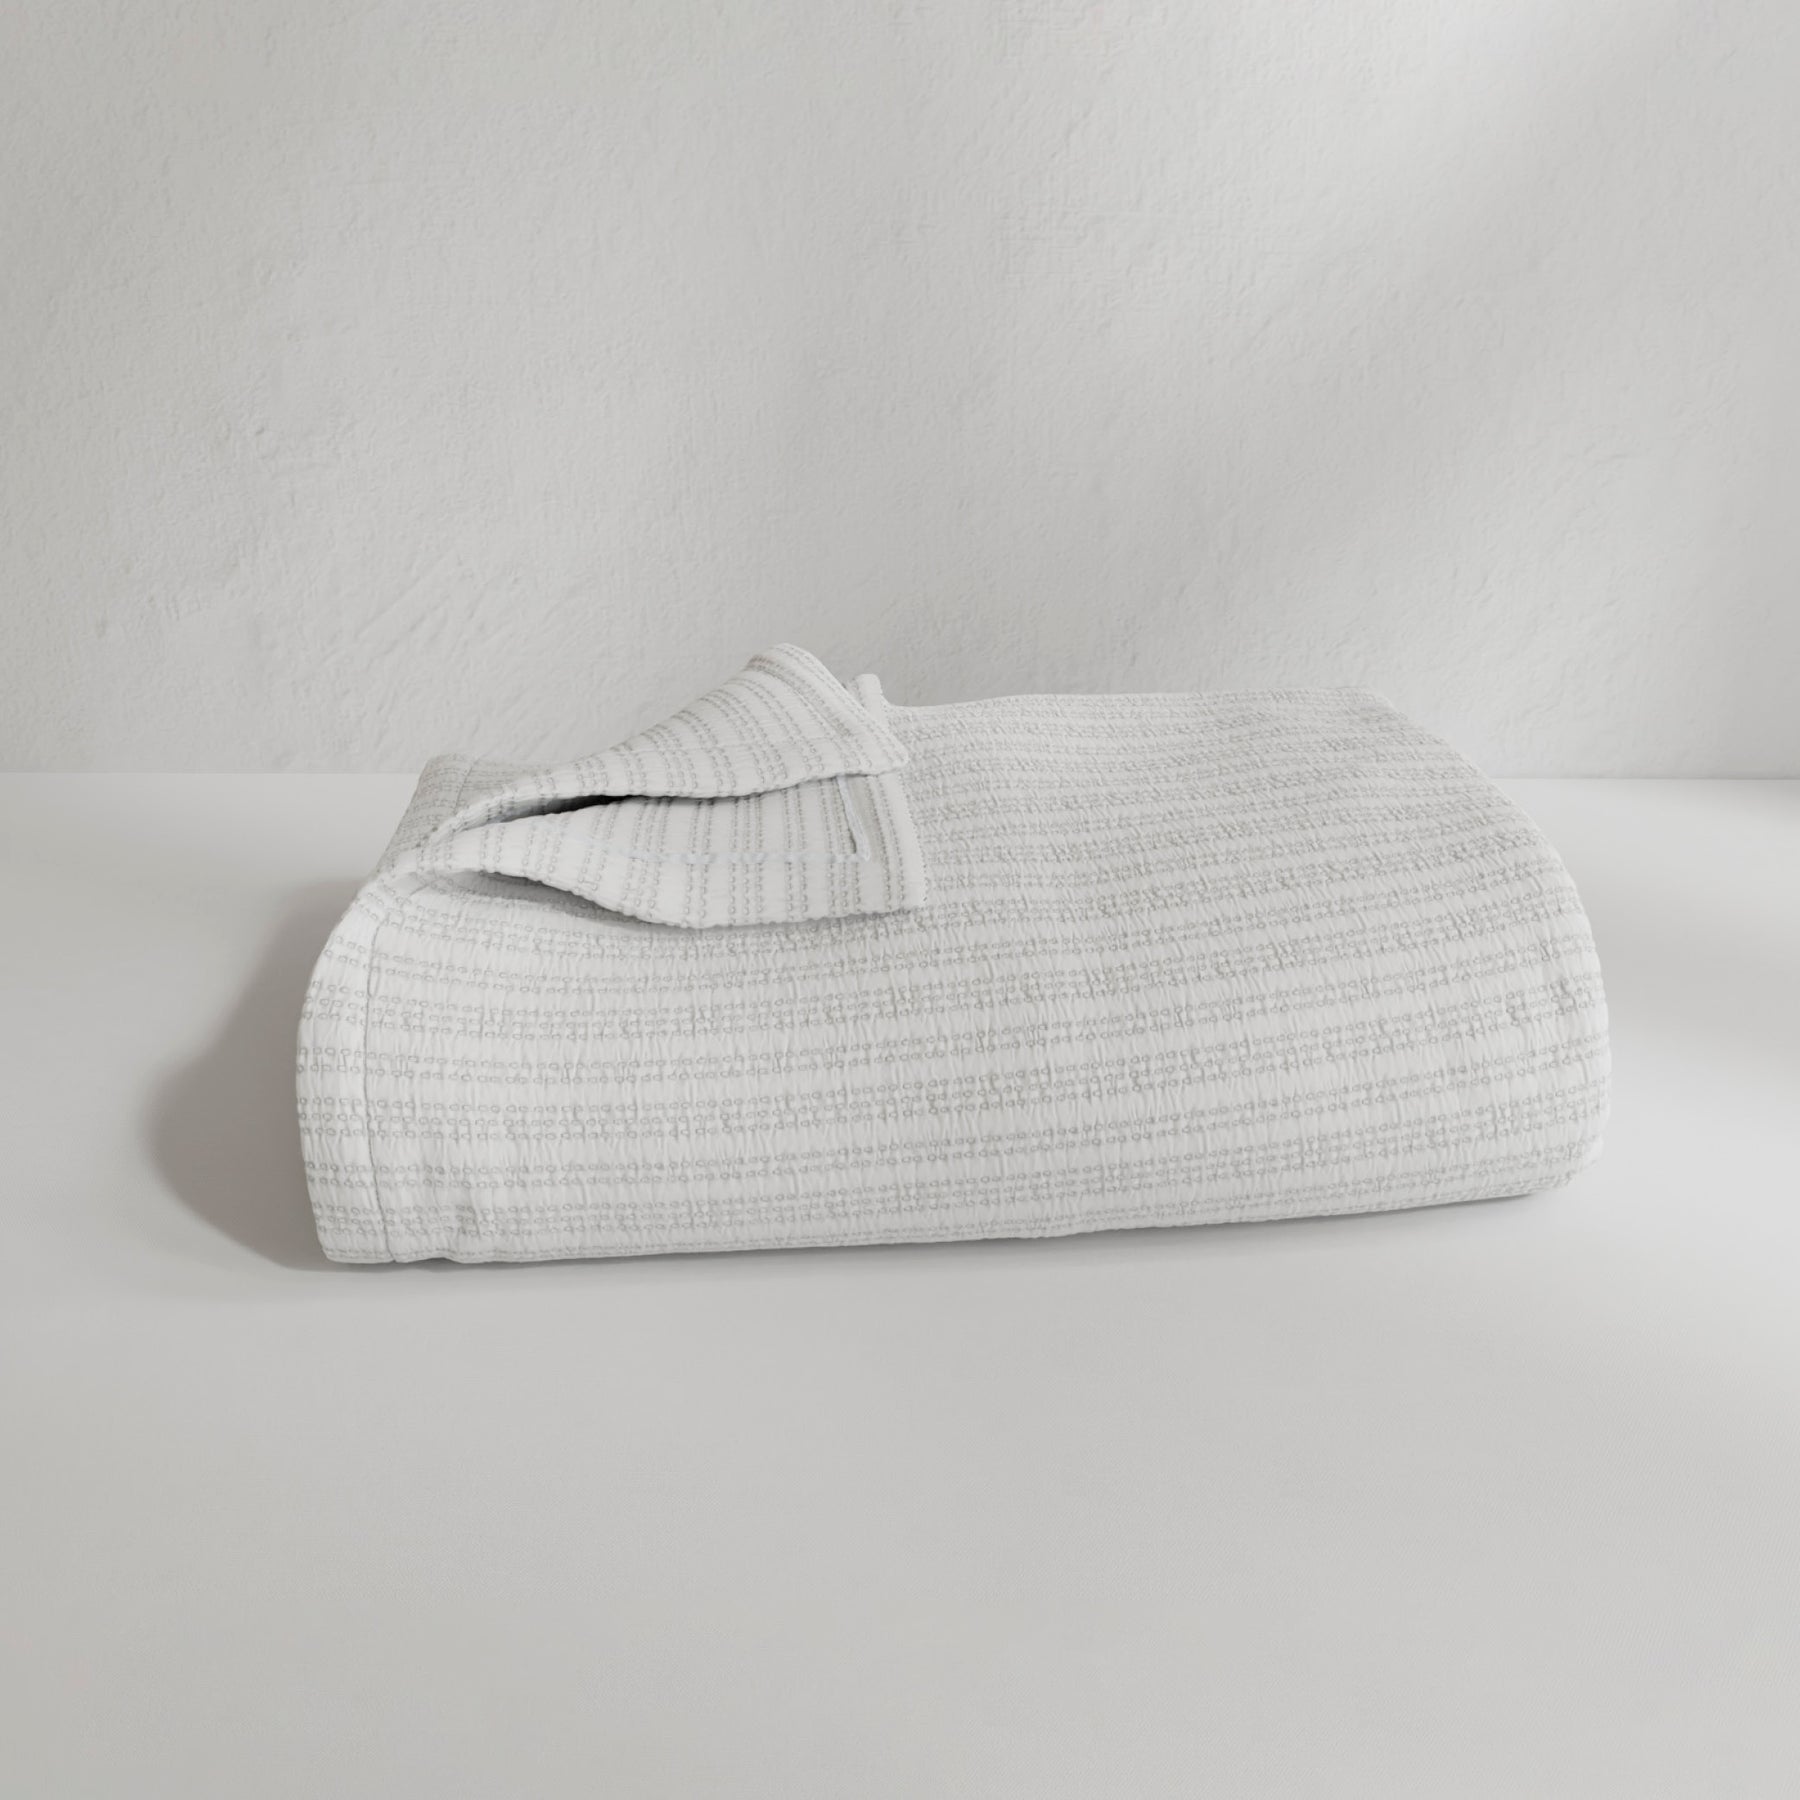 Image of a neatly folded Bright White Everyday Cotton Coverlet with the back left corner folded up on a white background